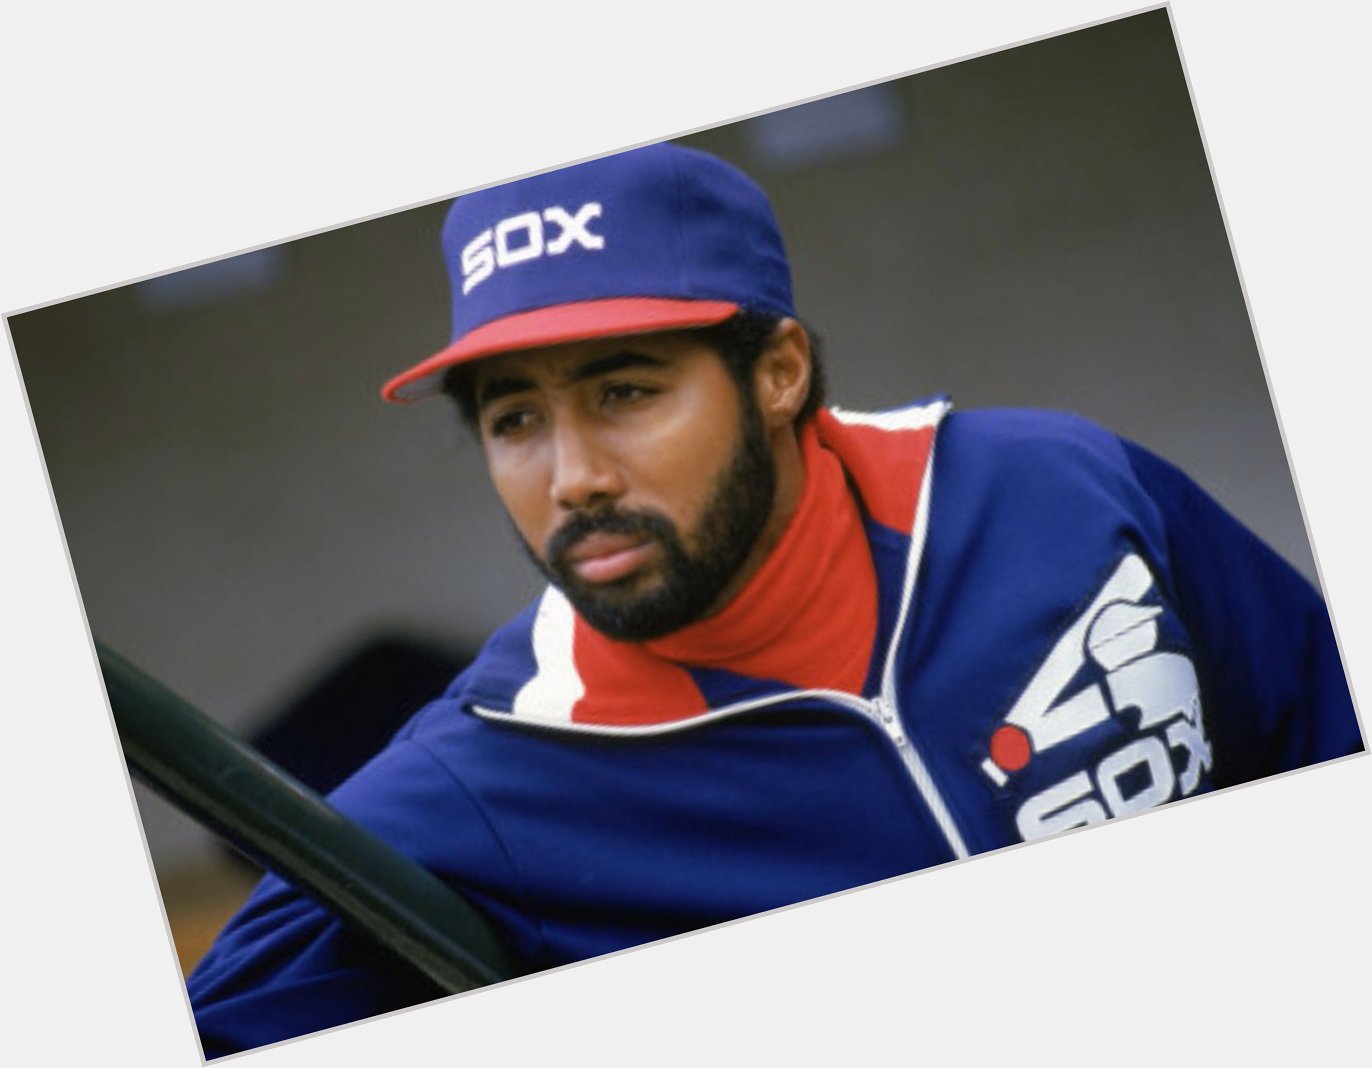 Happy birthday to Harold Baines, who looks like a Hall of Famer in his mid 1980 s White Sox warm up jacket 